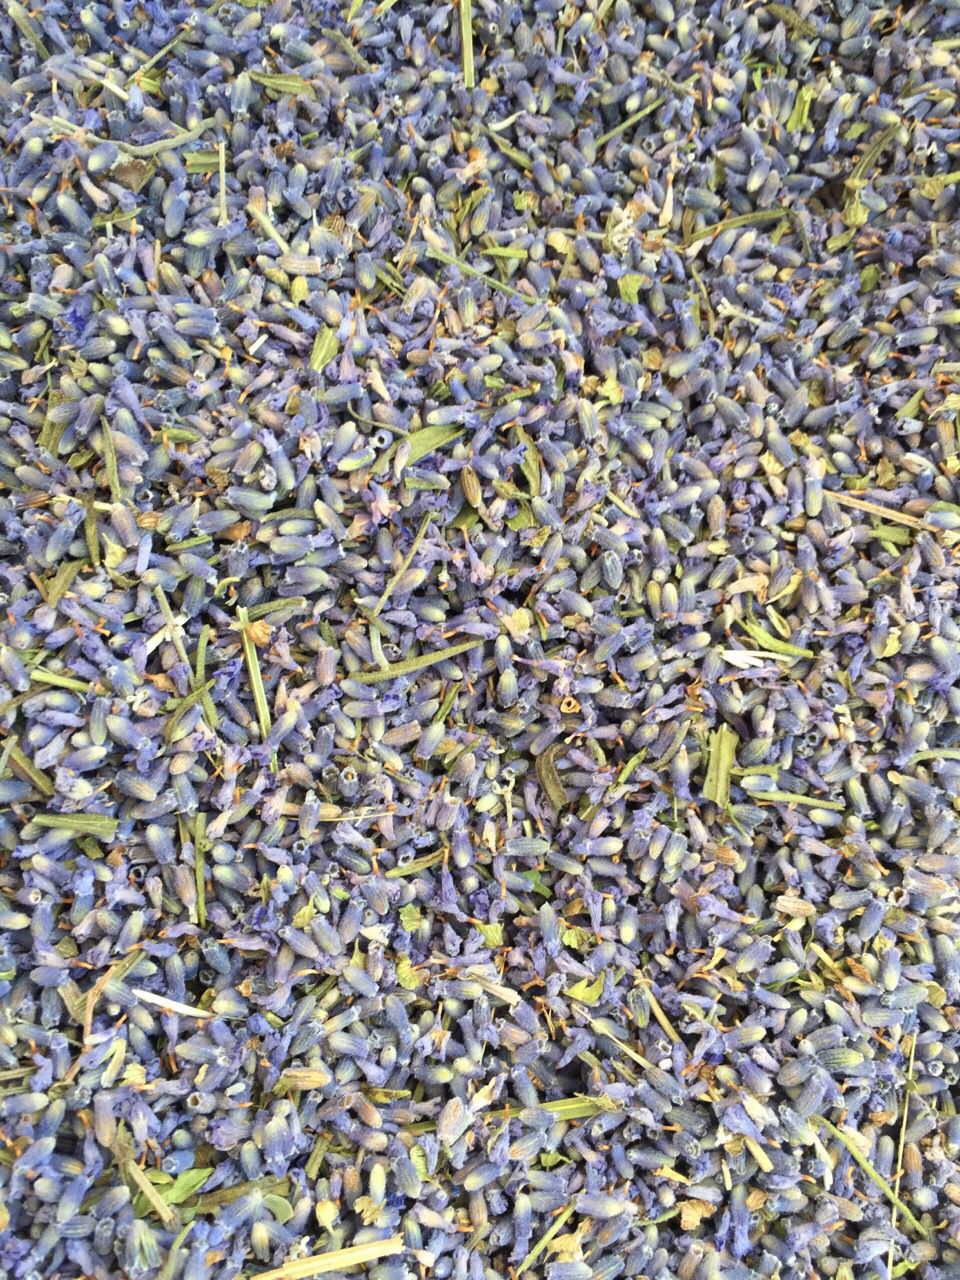 A Variety Of Xinjiang Lavender, Fragrant Lavender, filling, Tea and Essential Oil Dried Flower Particles